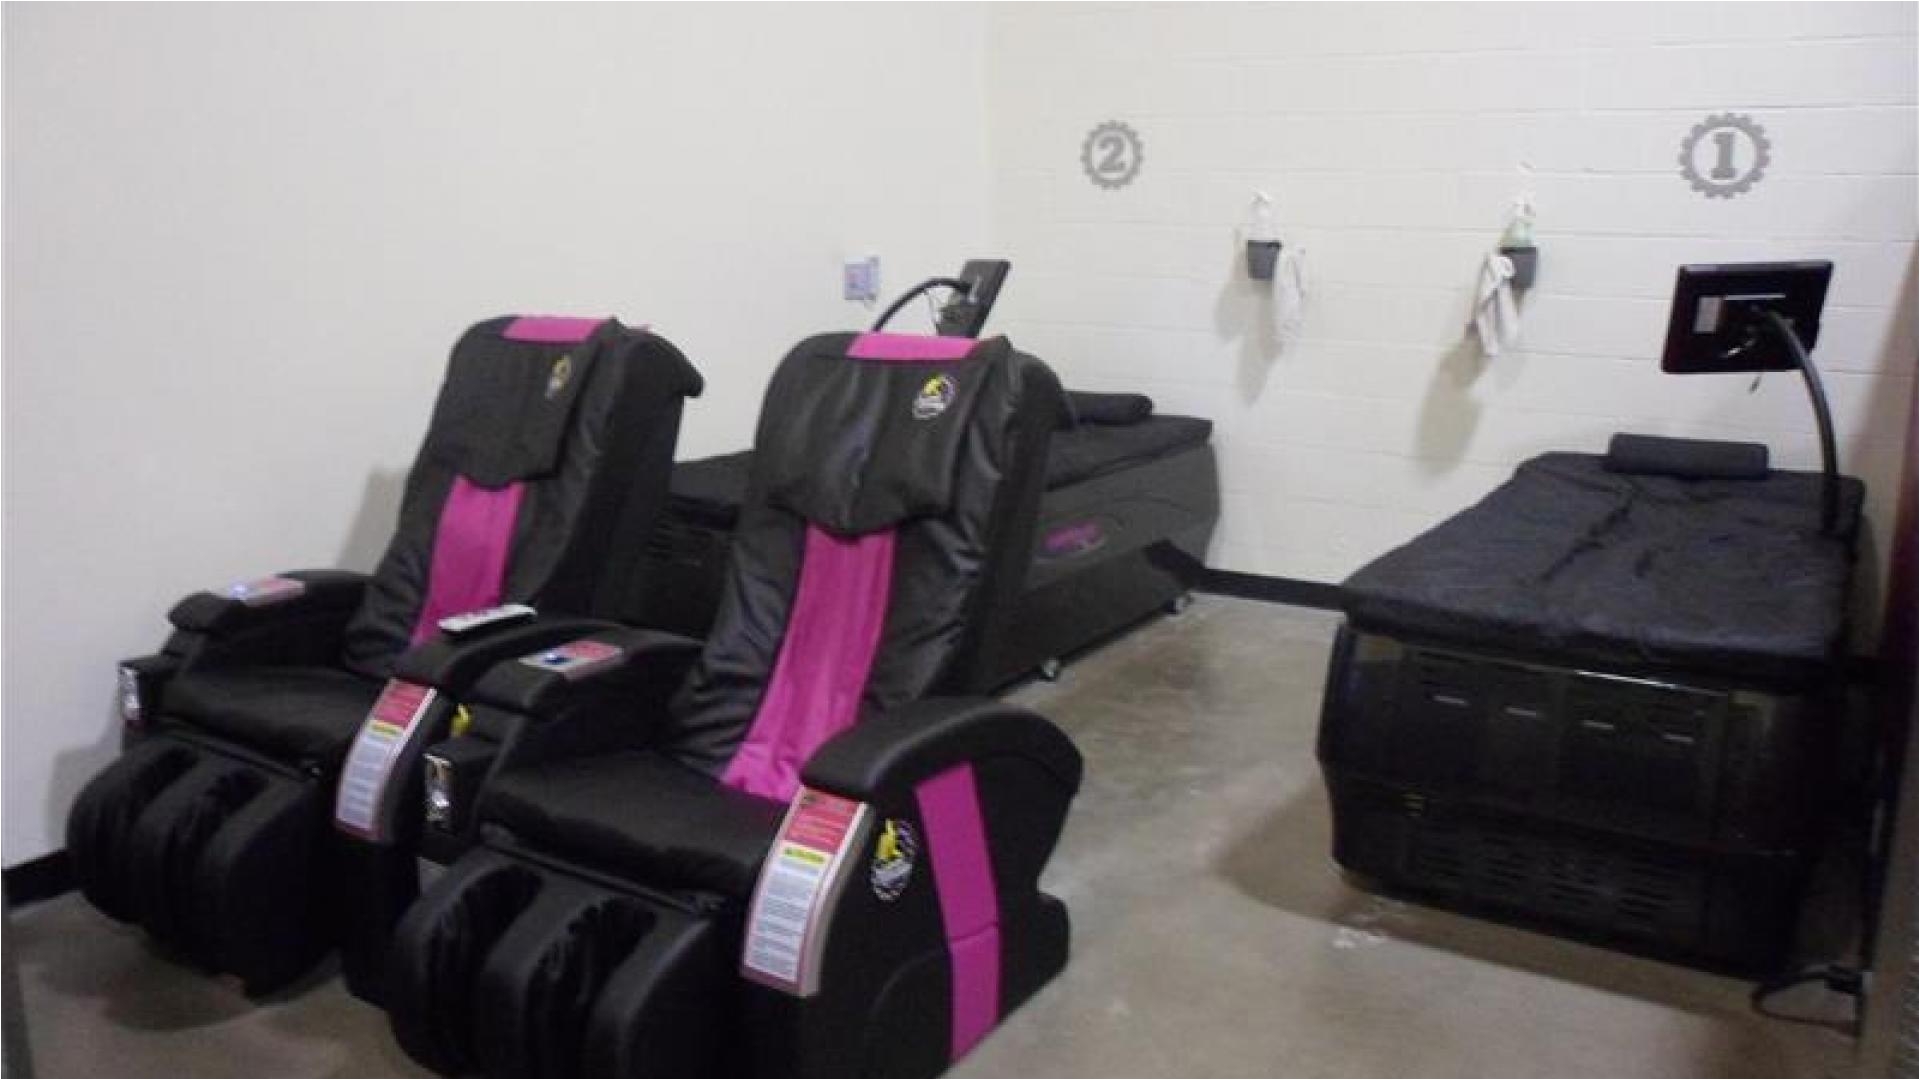 Planet Fitness Massage Chair Cost Stow Oh Planet Fitness